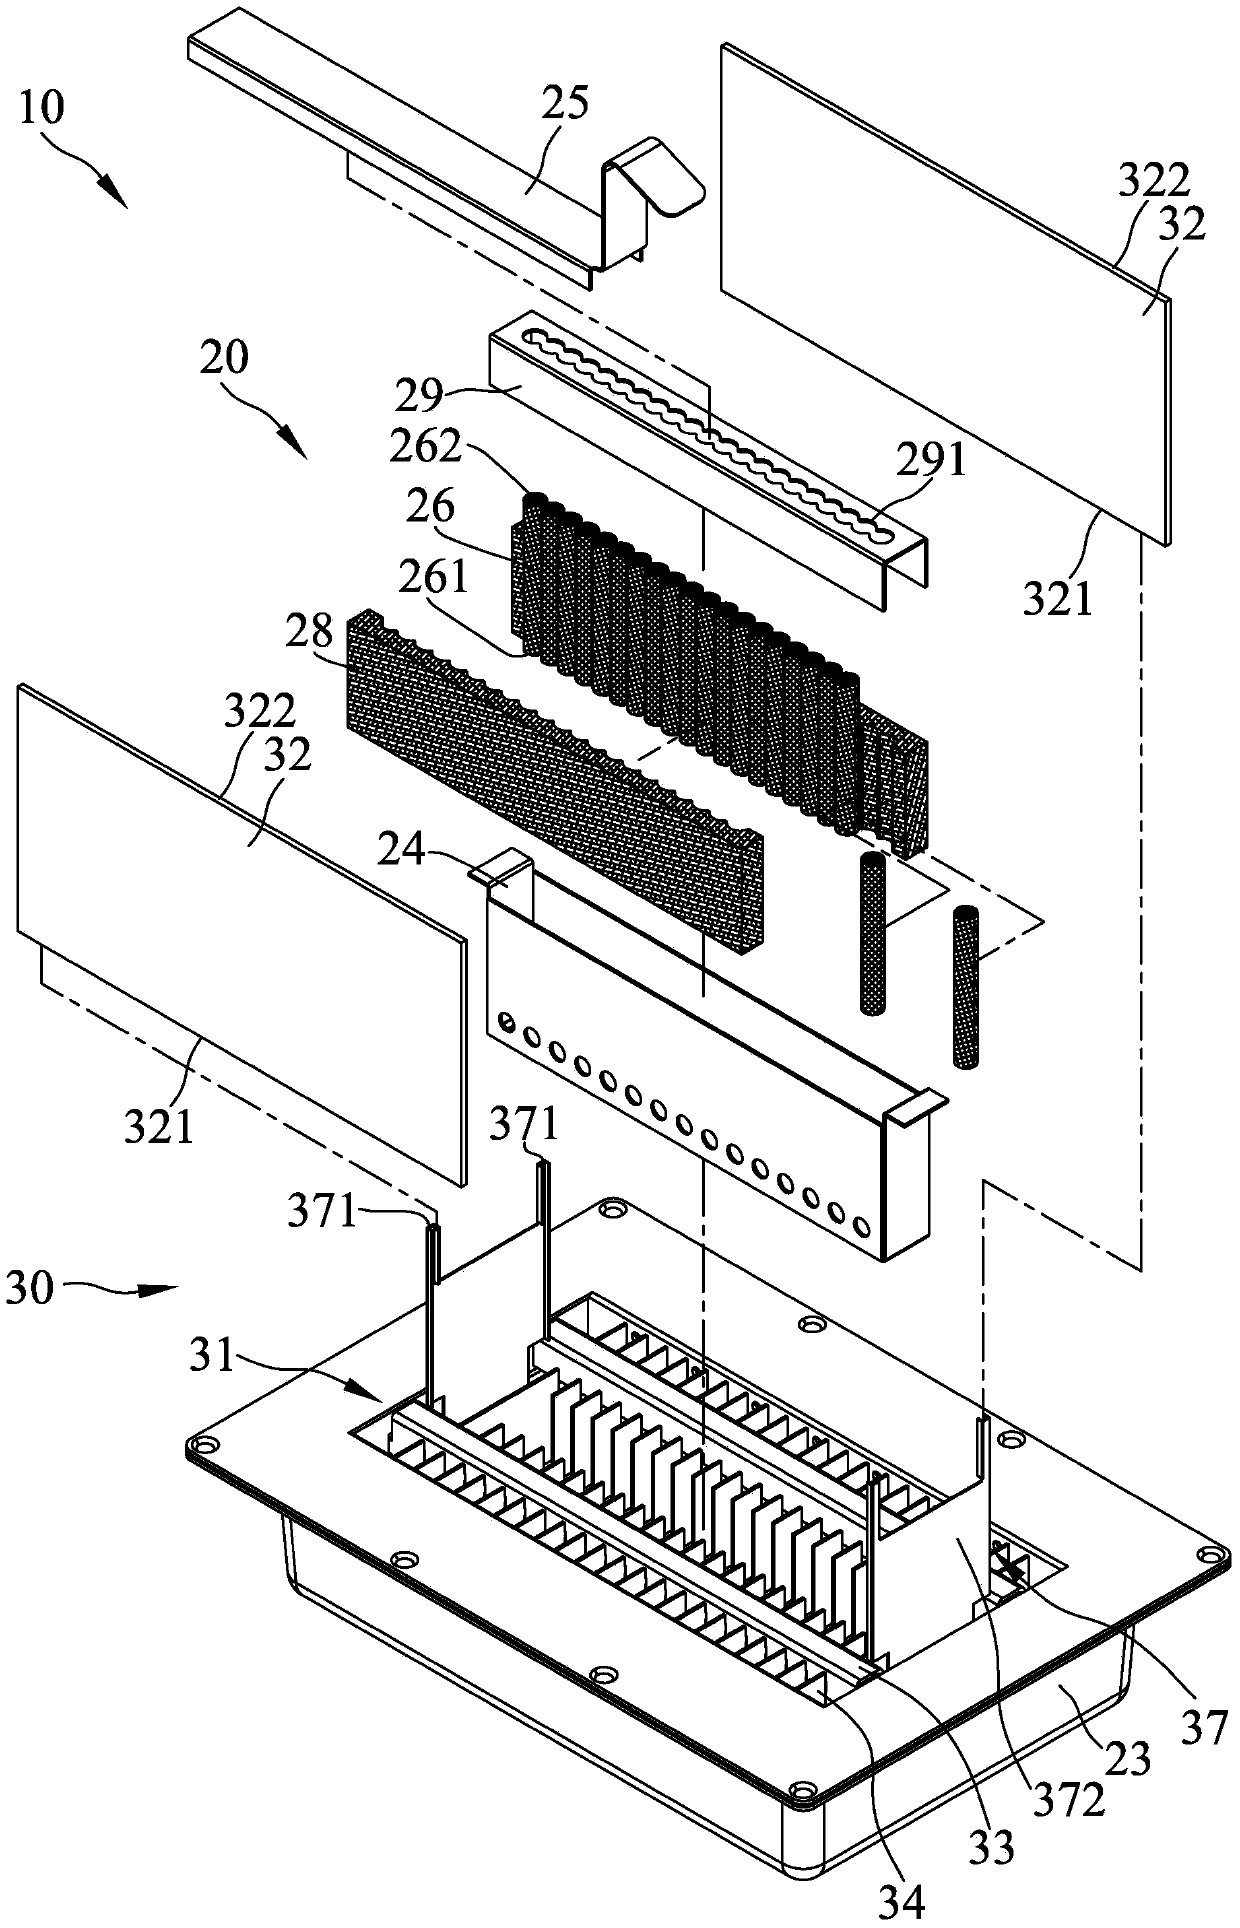 Combustion device with safety